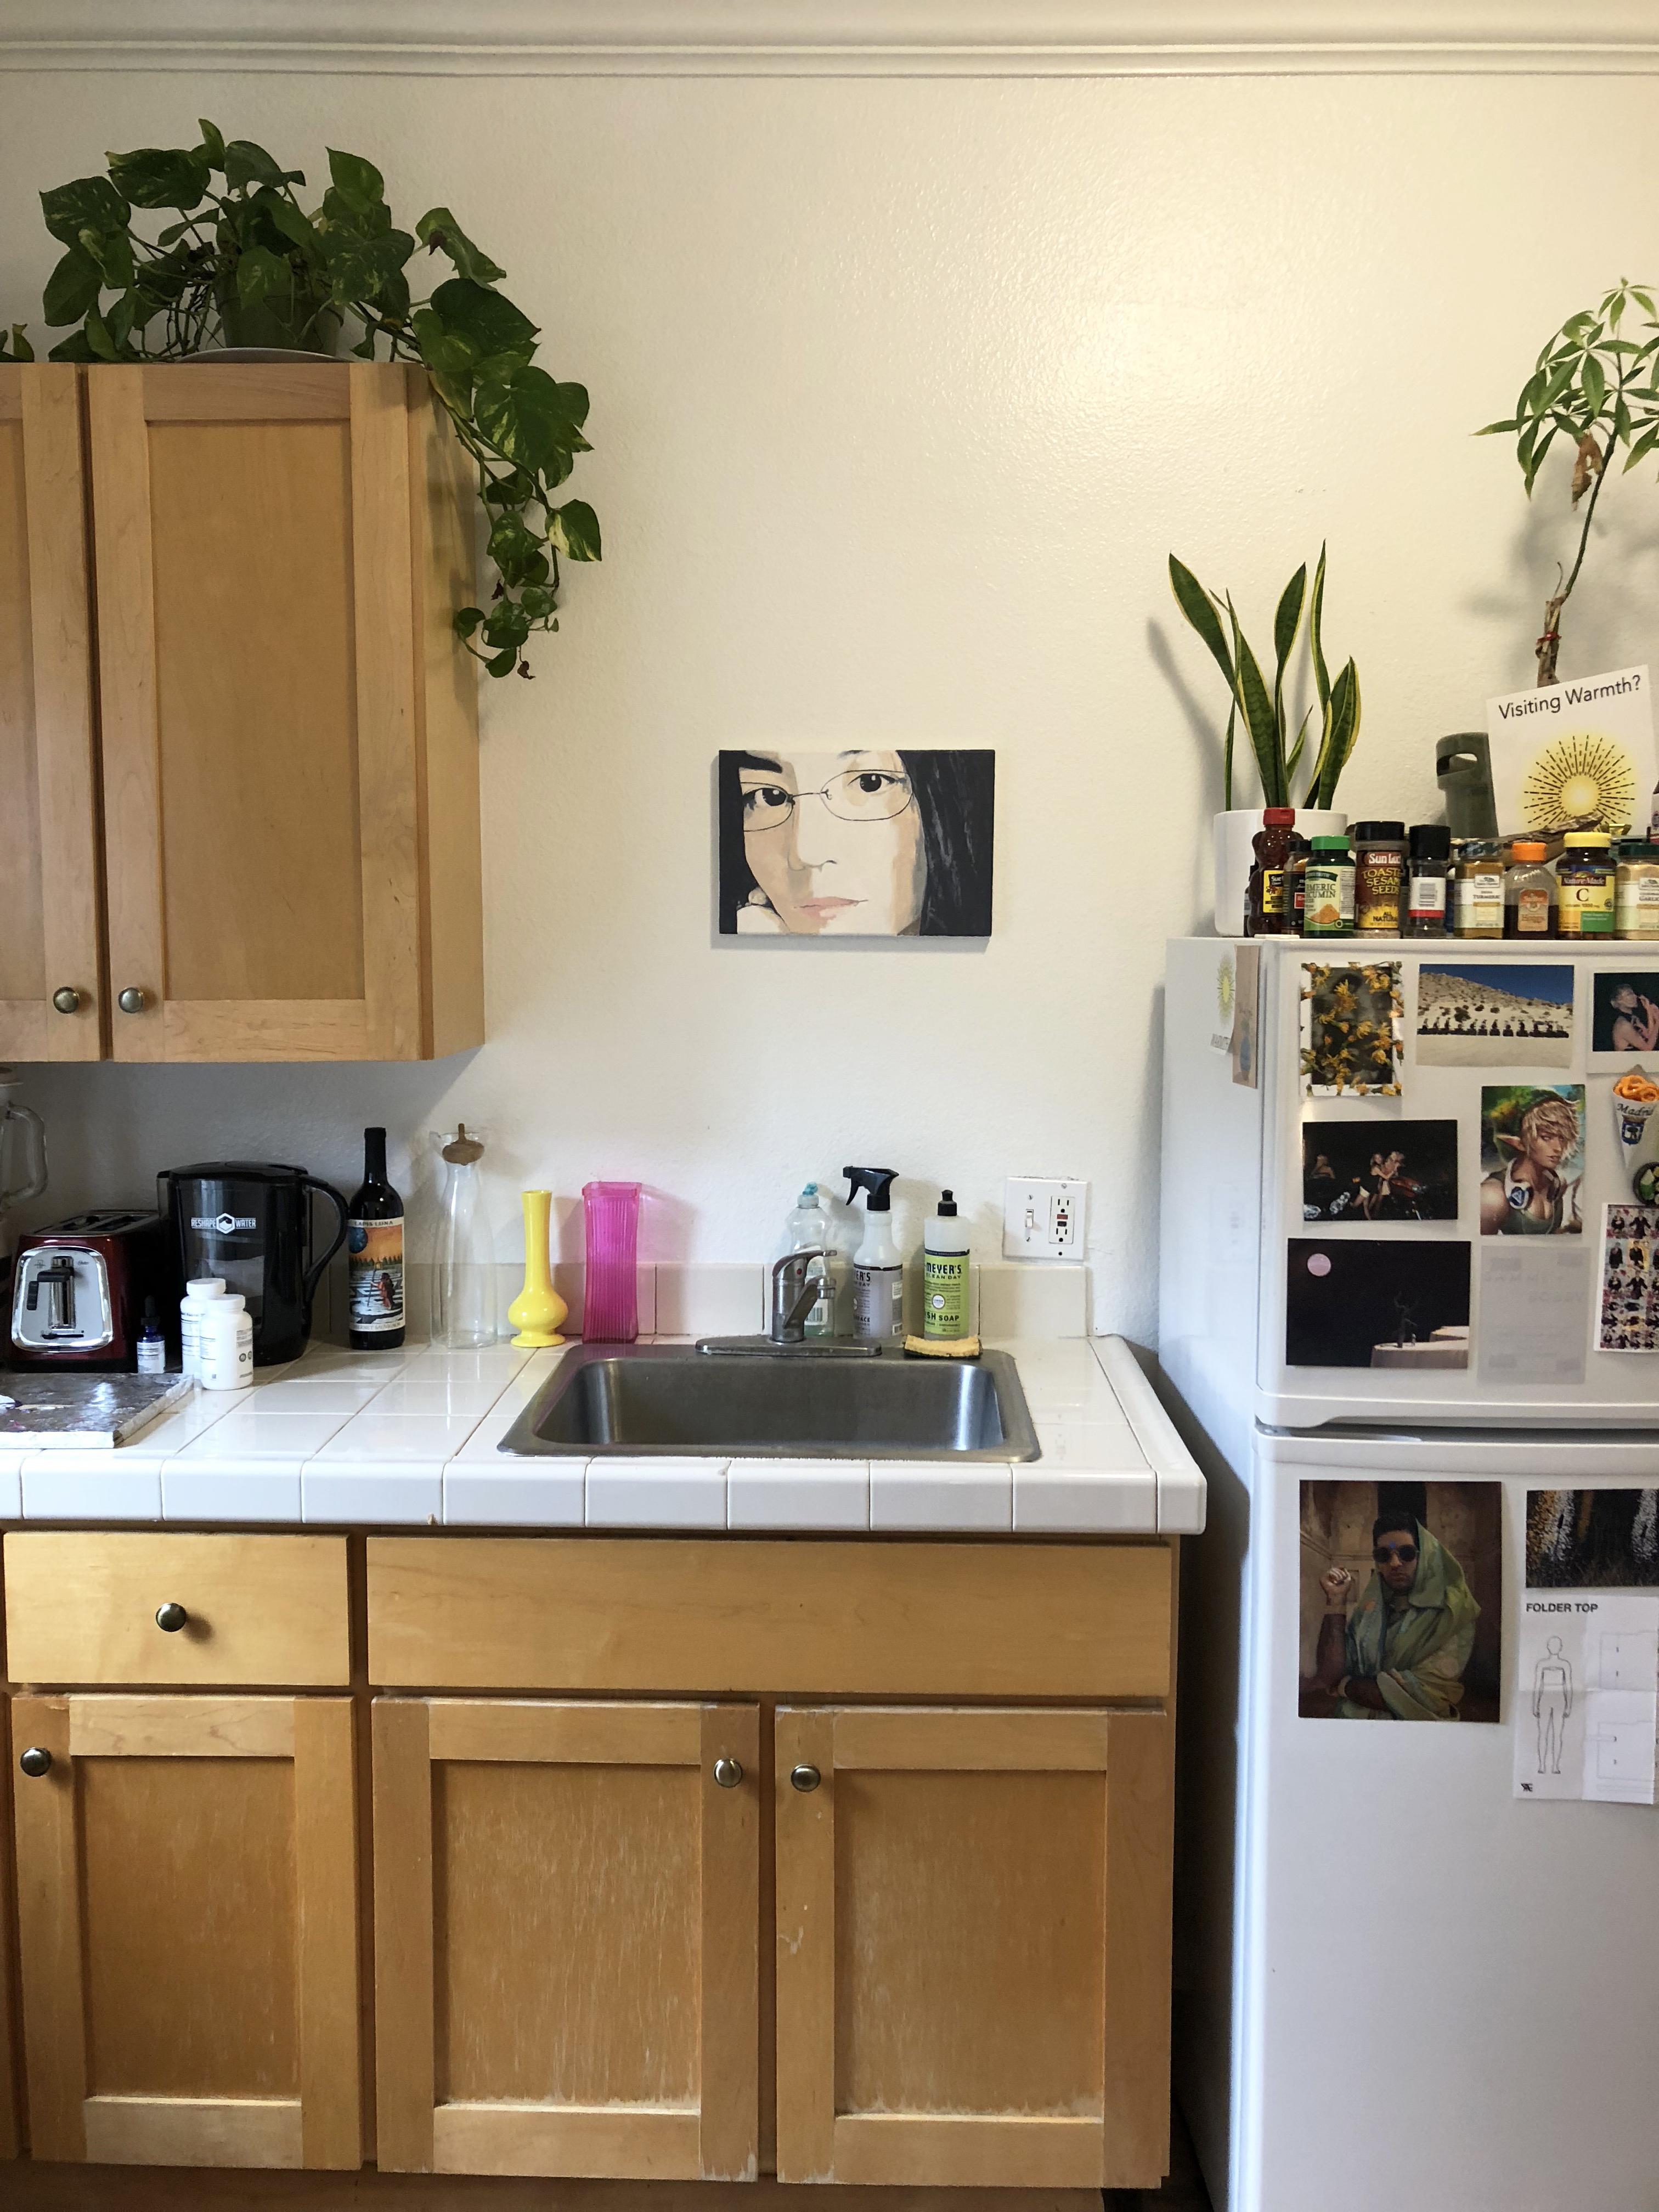 A small painting of Maye Wong above a kitchen sink